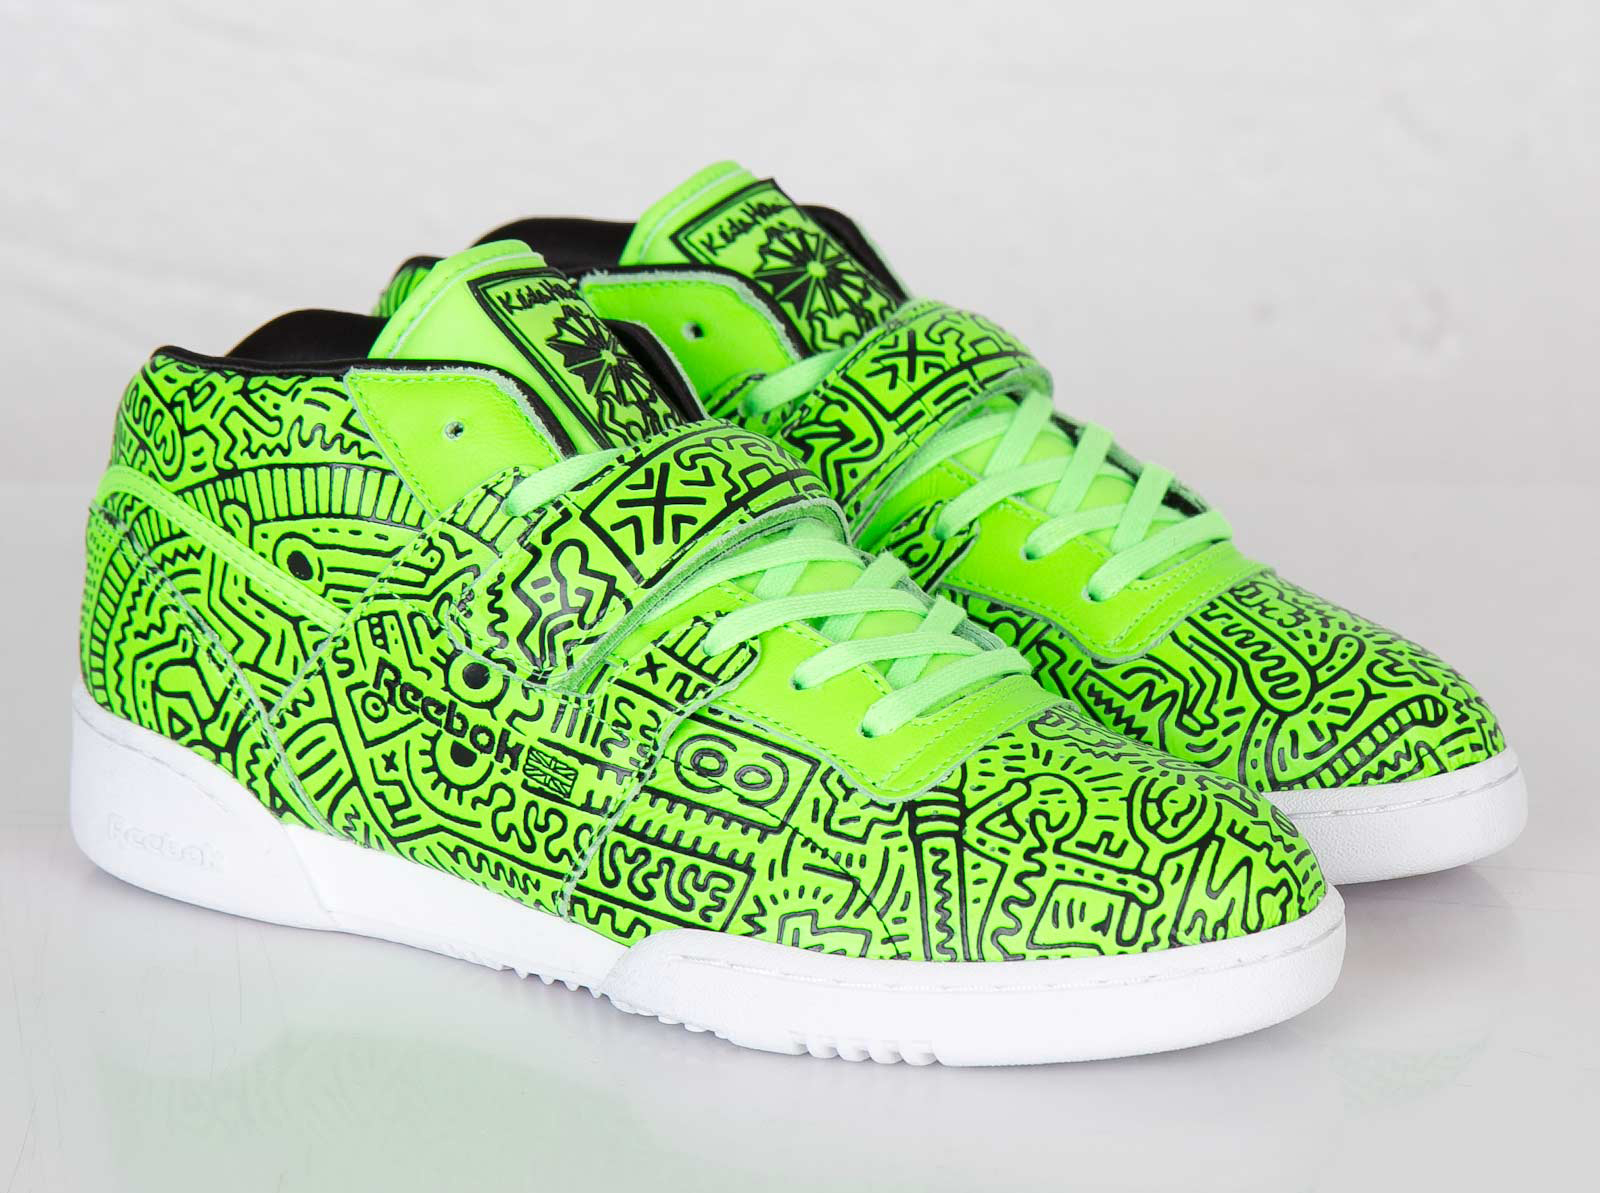 Keith Haring x Reebok Workout Mid Strap INT